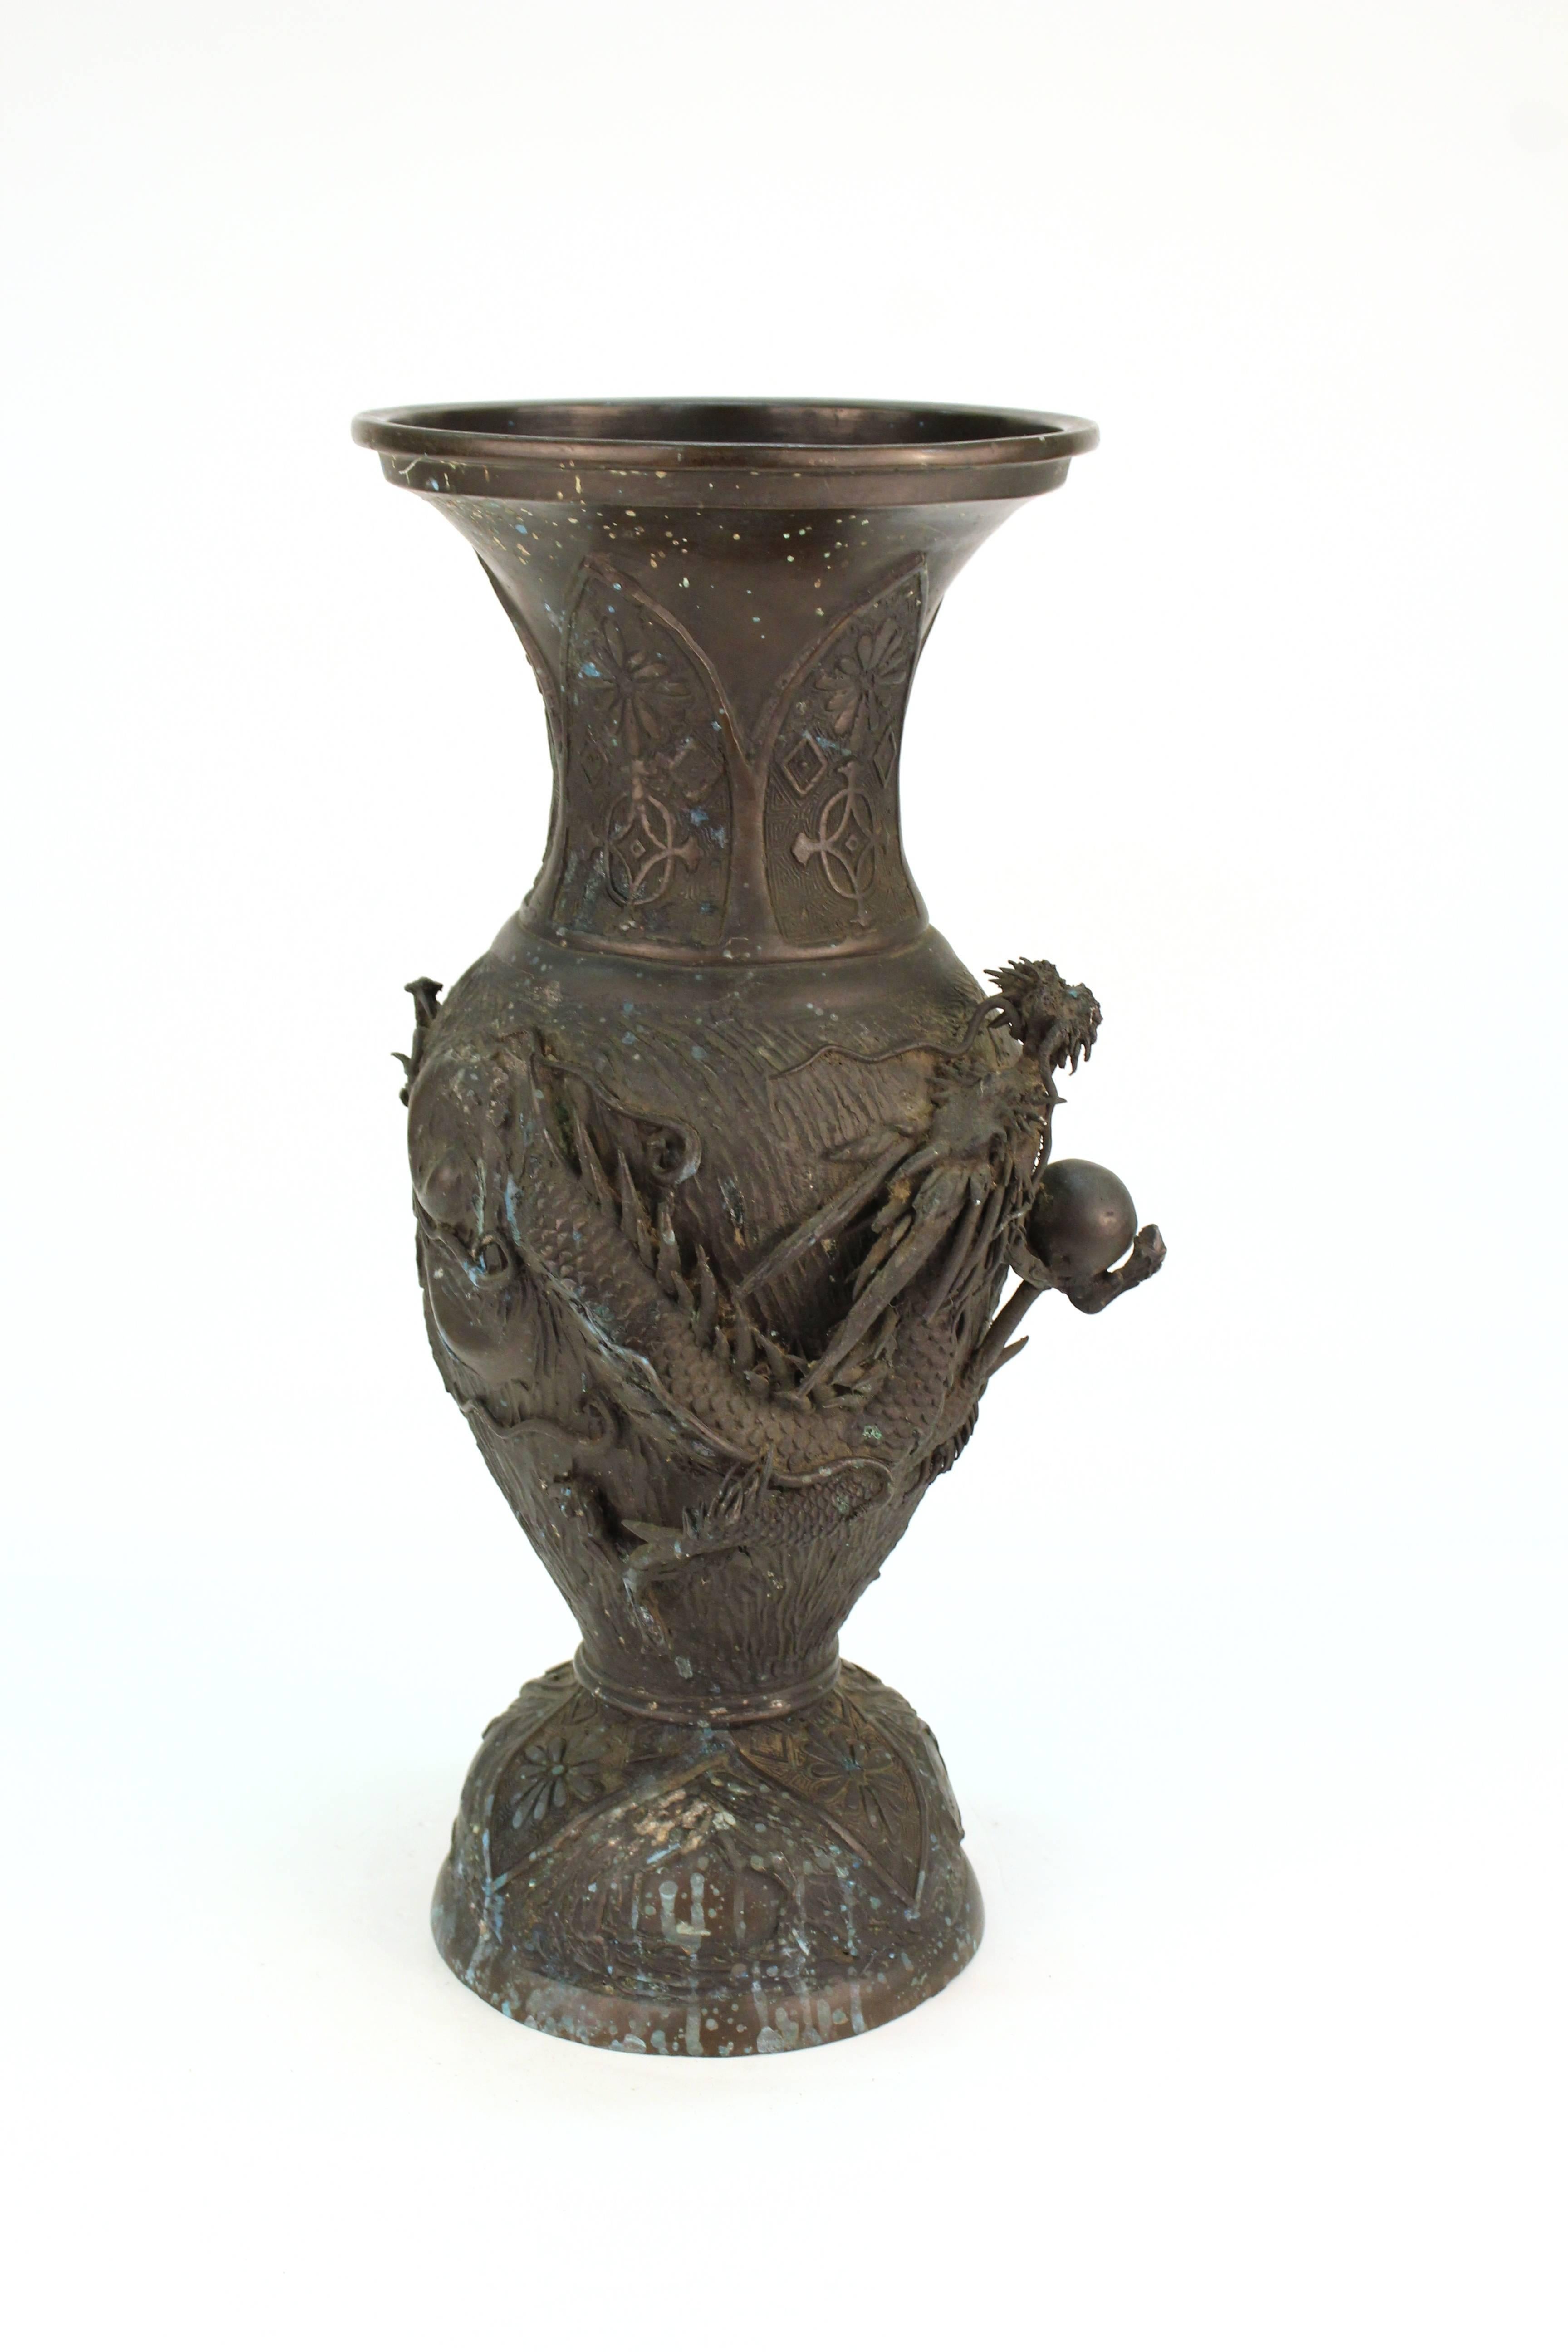 A sculpted Japanese vase in cast metal, with a dragon theme sculpted on the outer circumference. The piece has color splatter on one side and is in good vintage condition.